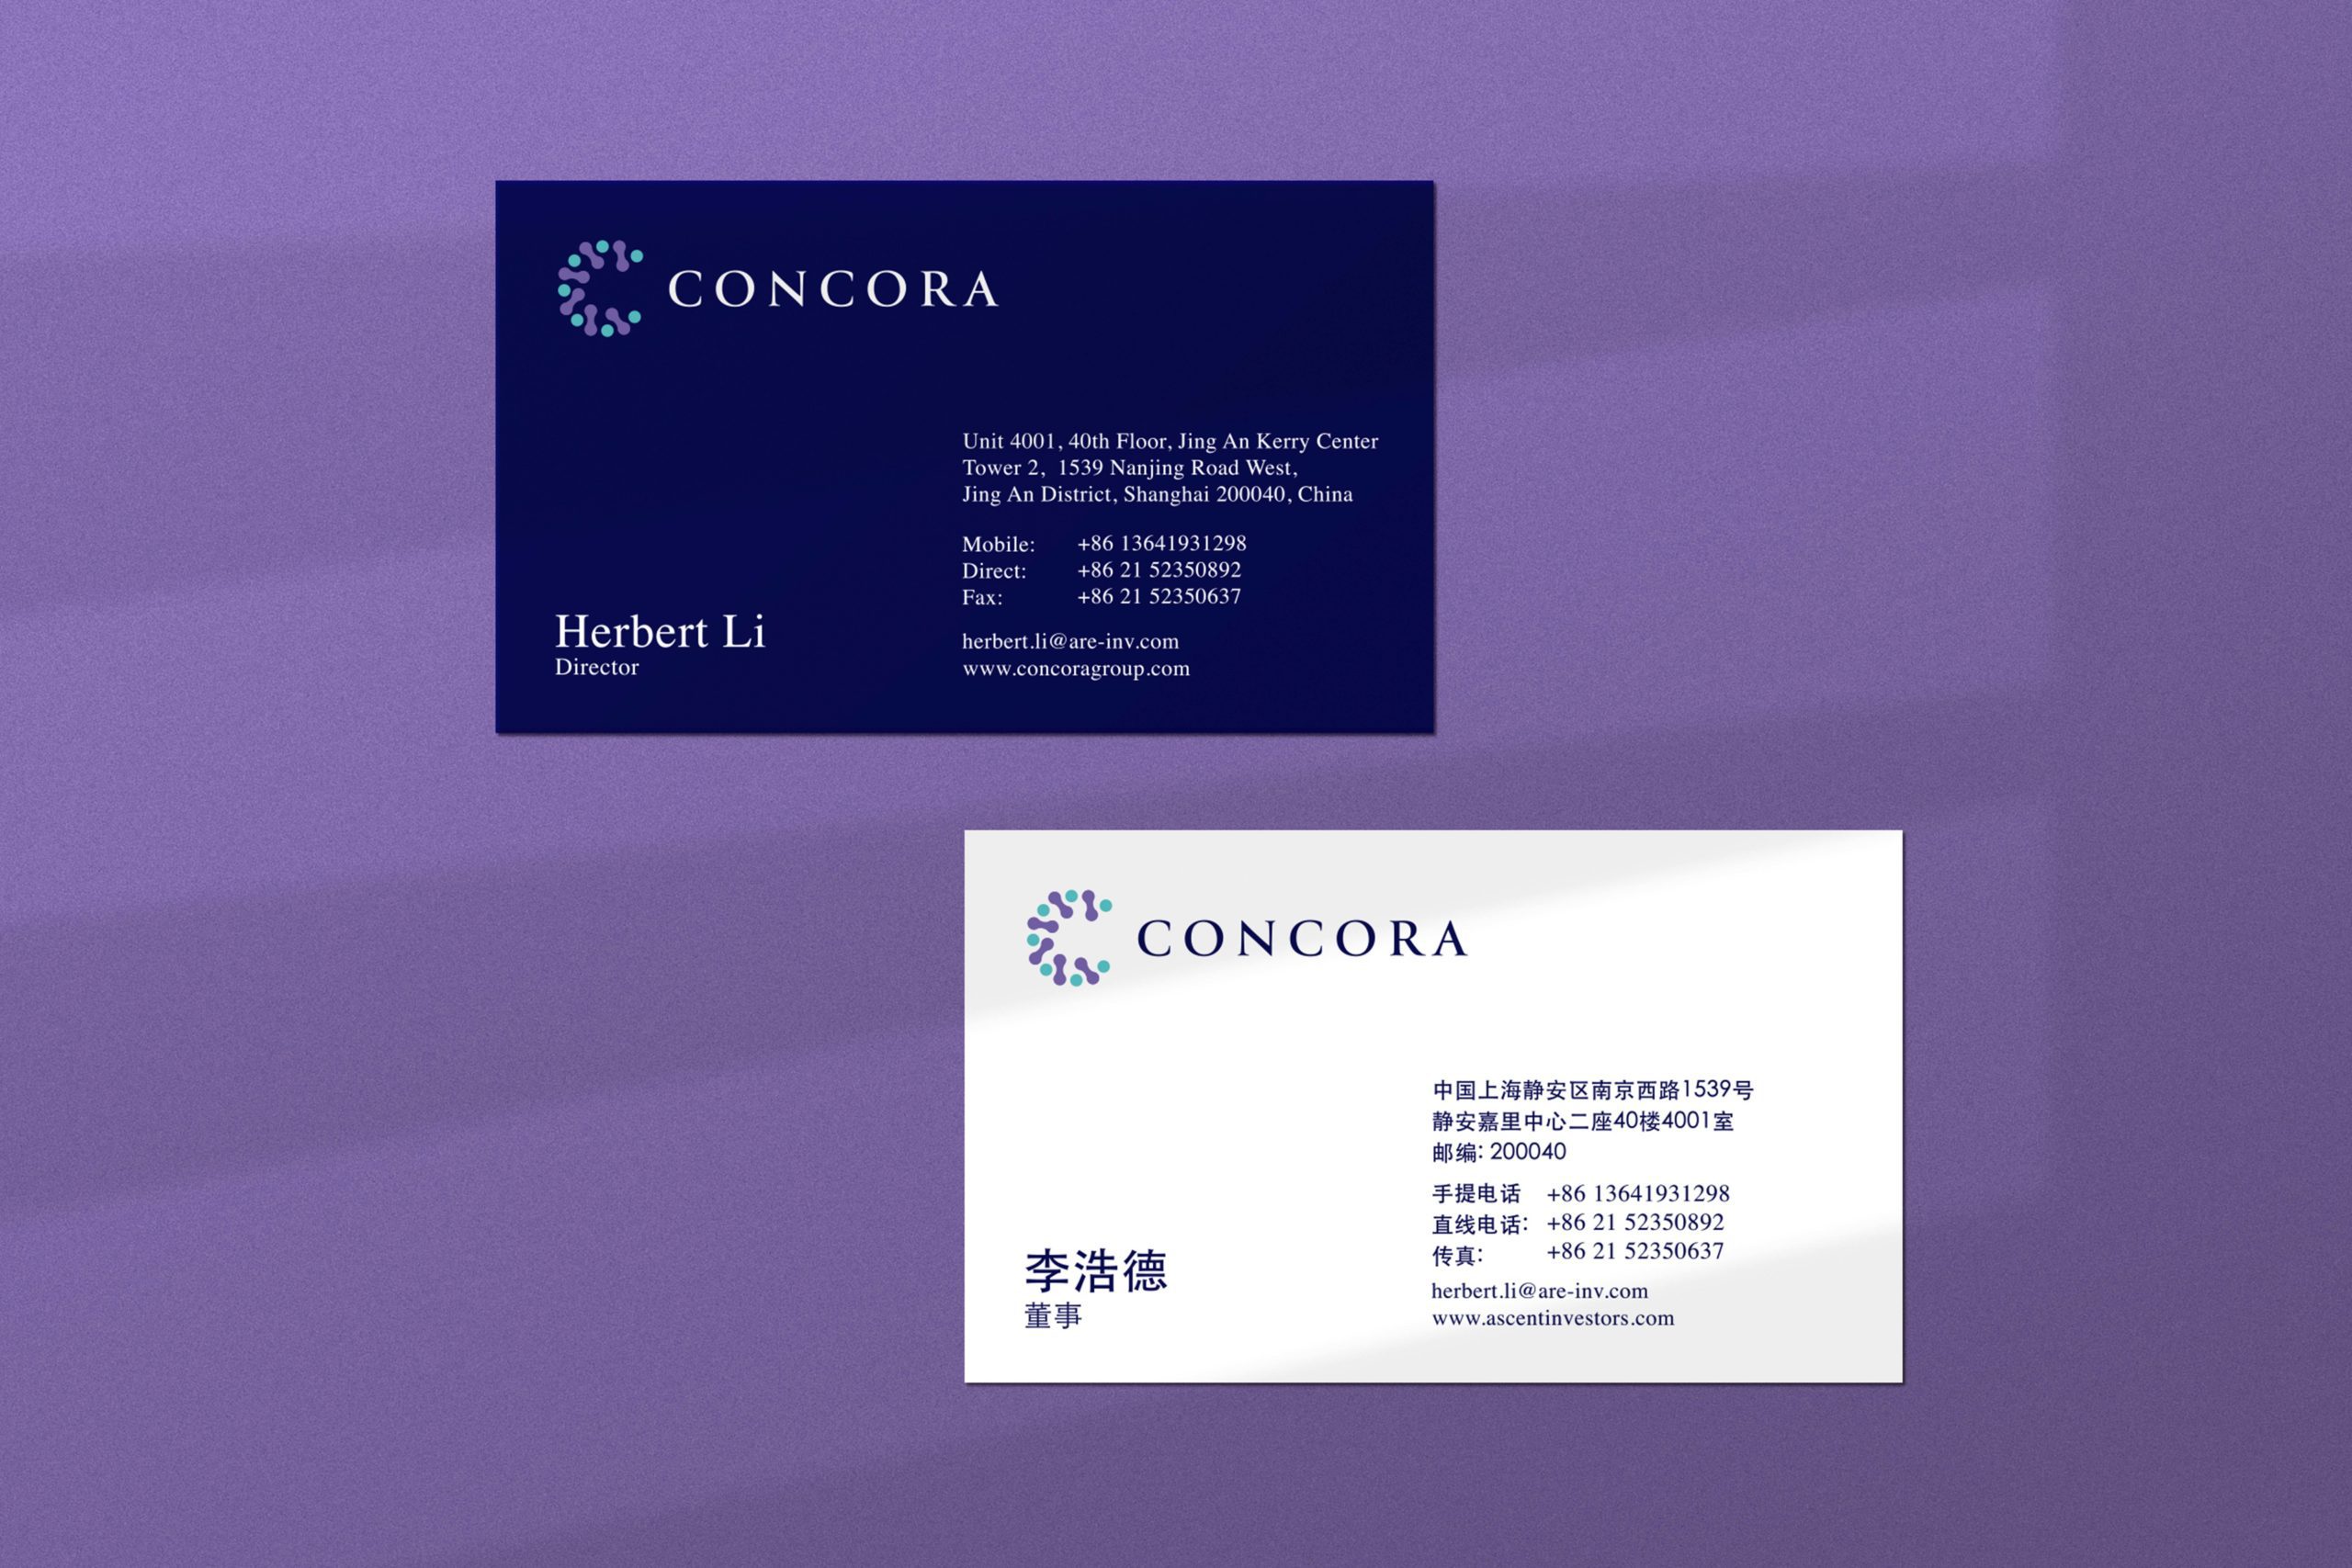 Concora Branding Project Business Cards Design